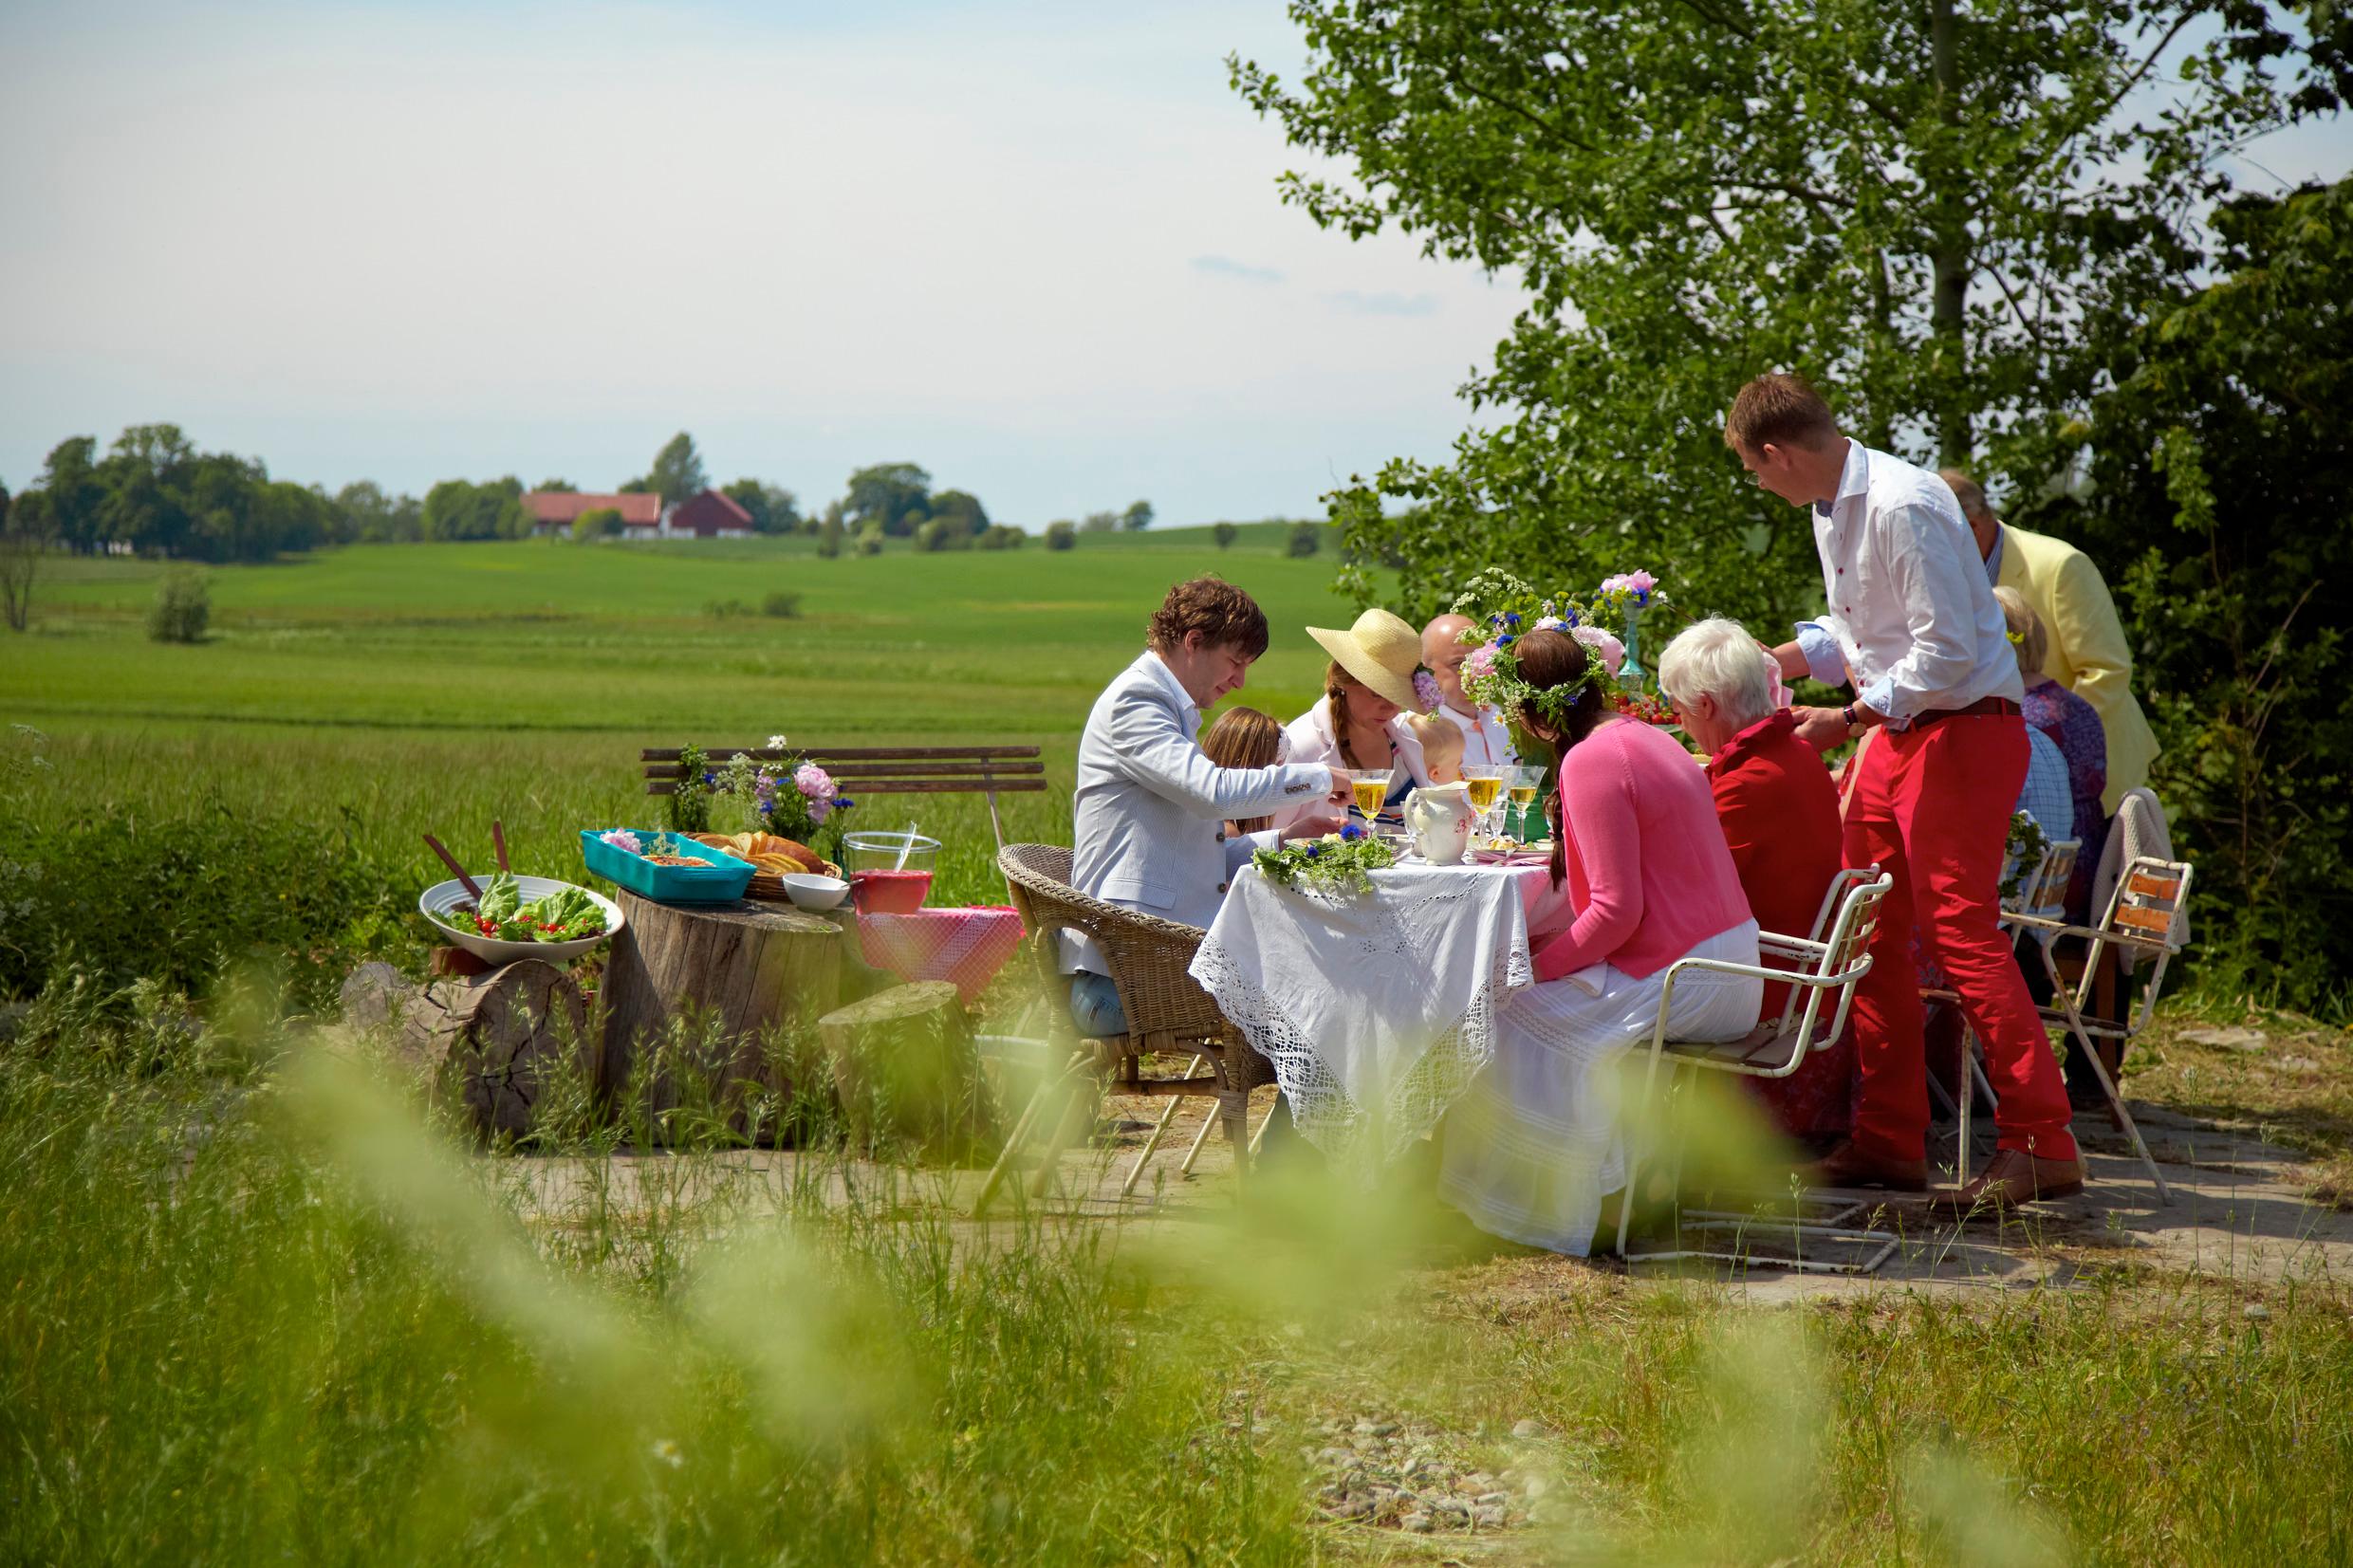 A group of people are sitting down by a table out in a field, eating and drinking. Some wear Midsummer flowers in their hair.